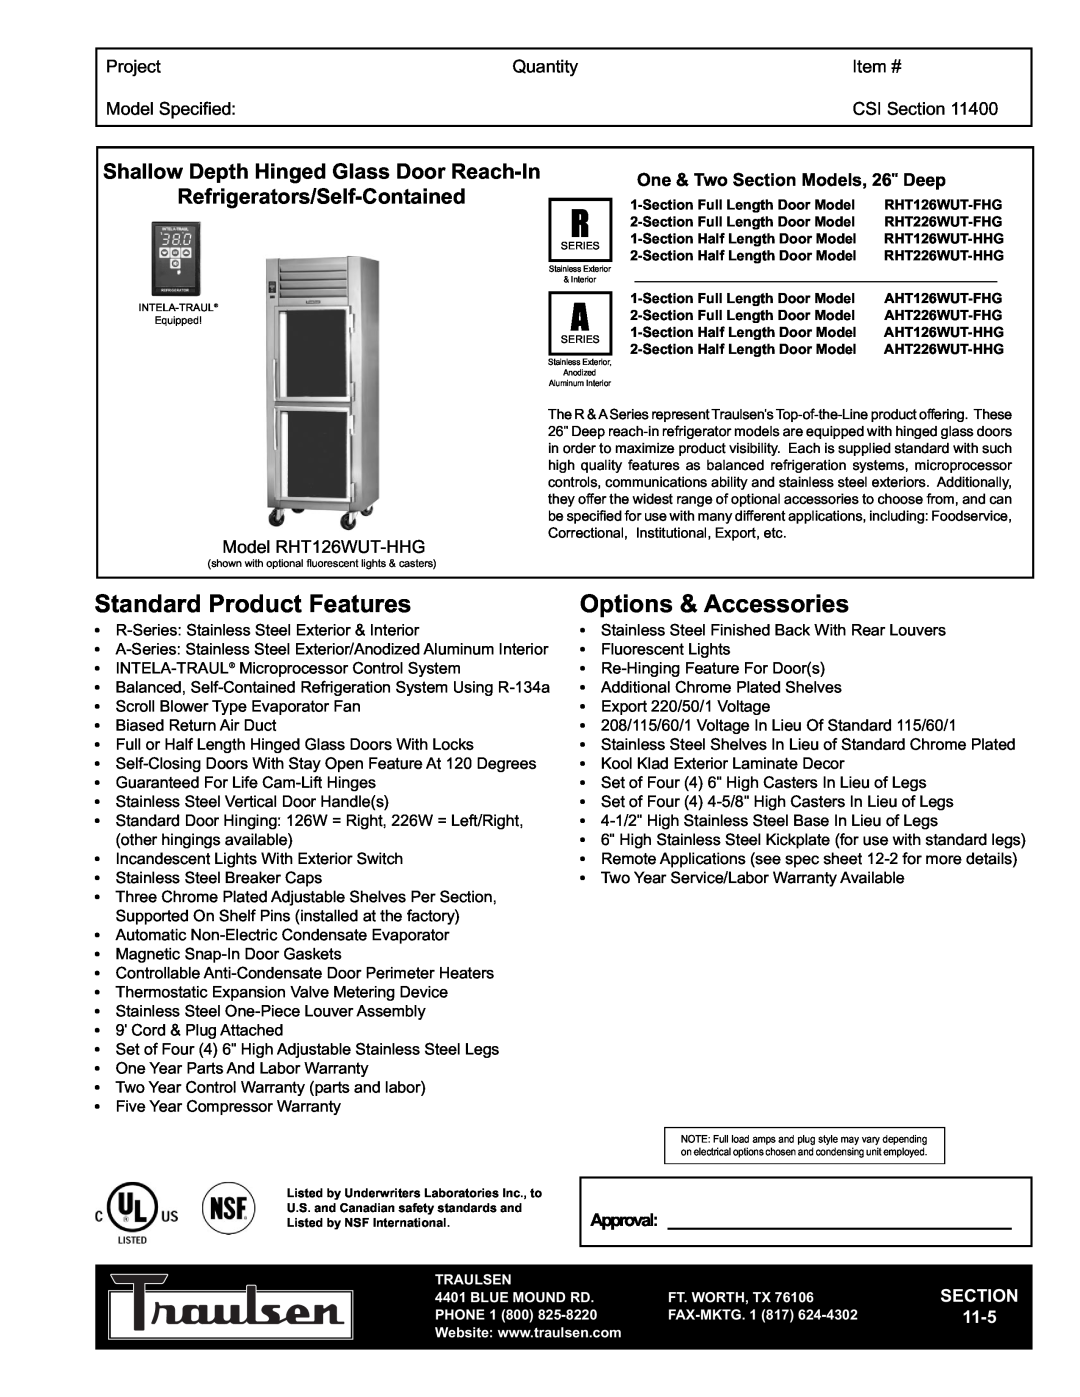 Traulsen RHT126WUT-HHG warranty Refrigerators/Self-Contained, Project, Quantity, Item #, Model Specified, CSI Section 